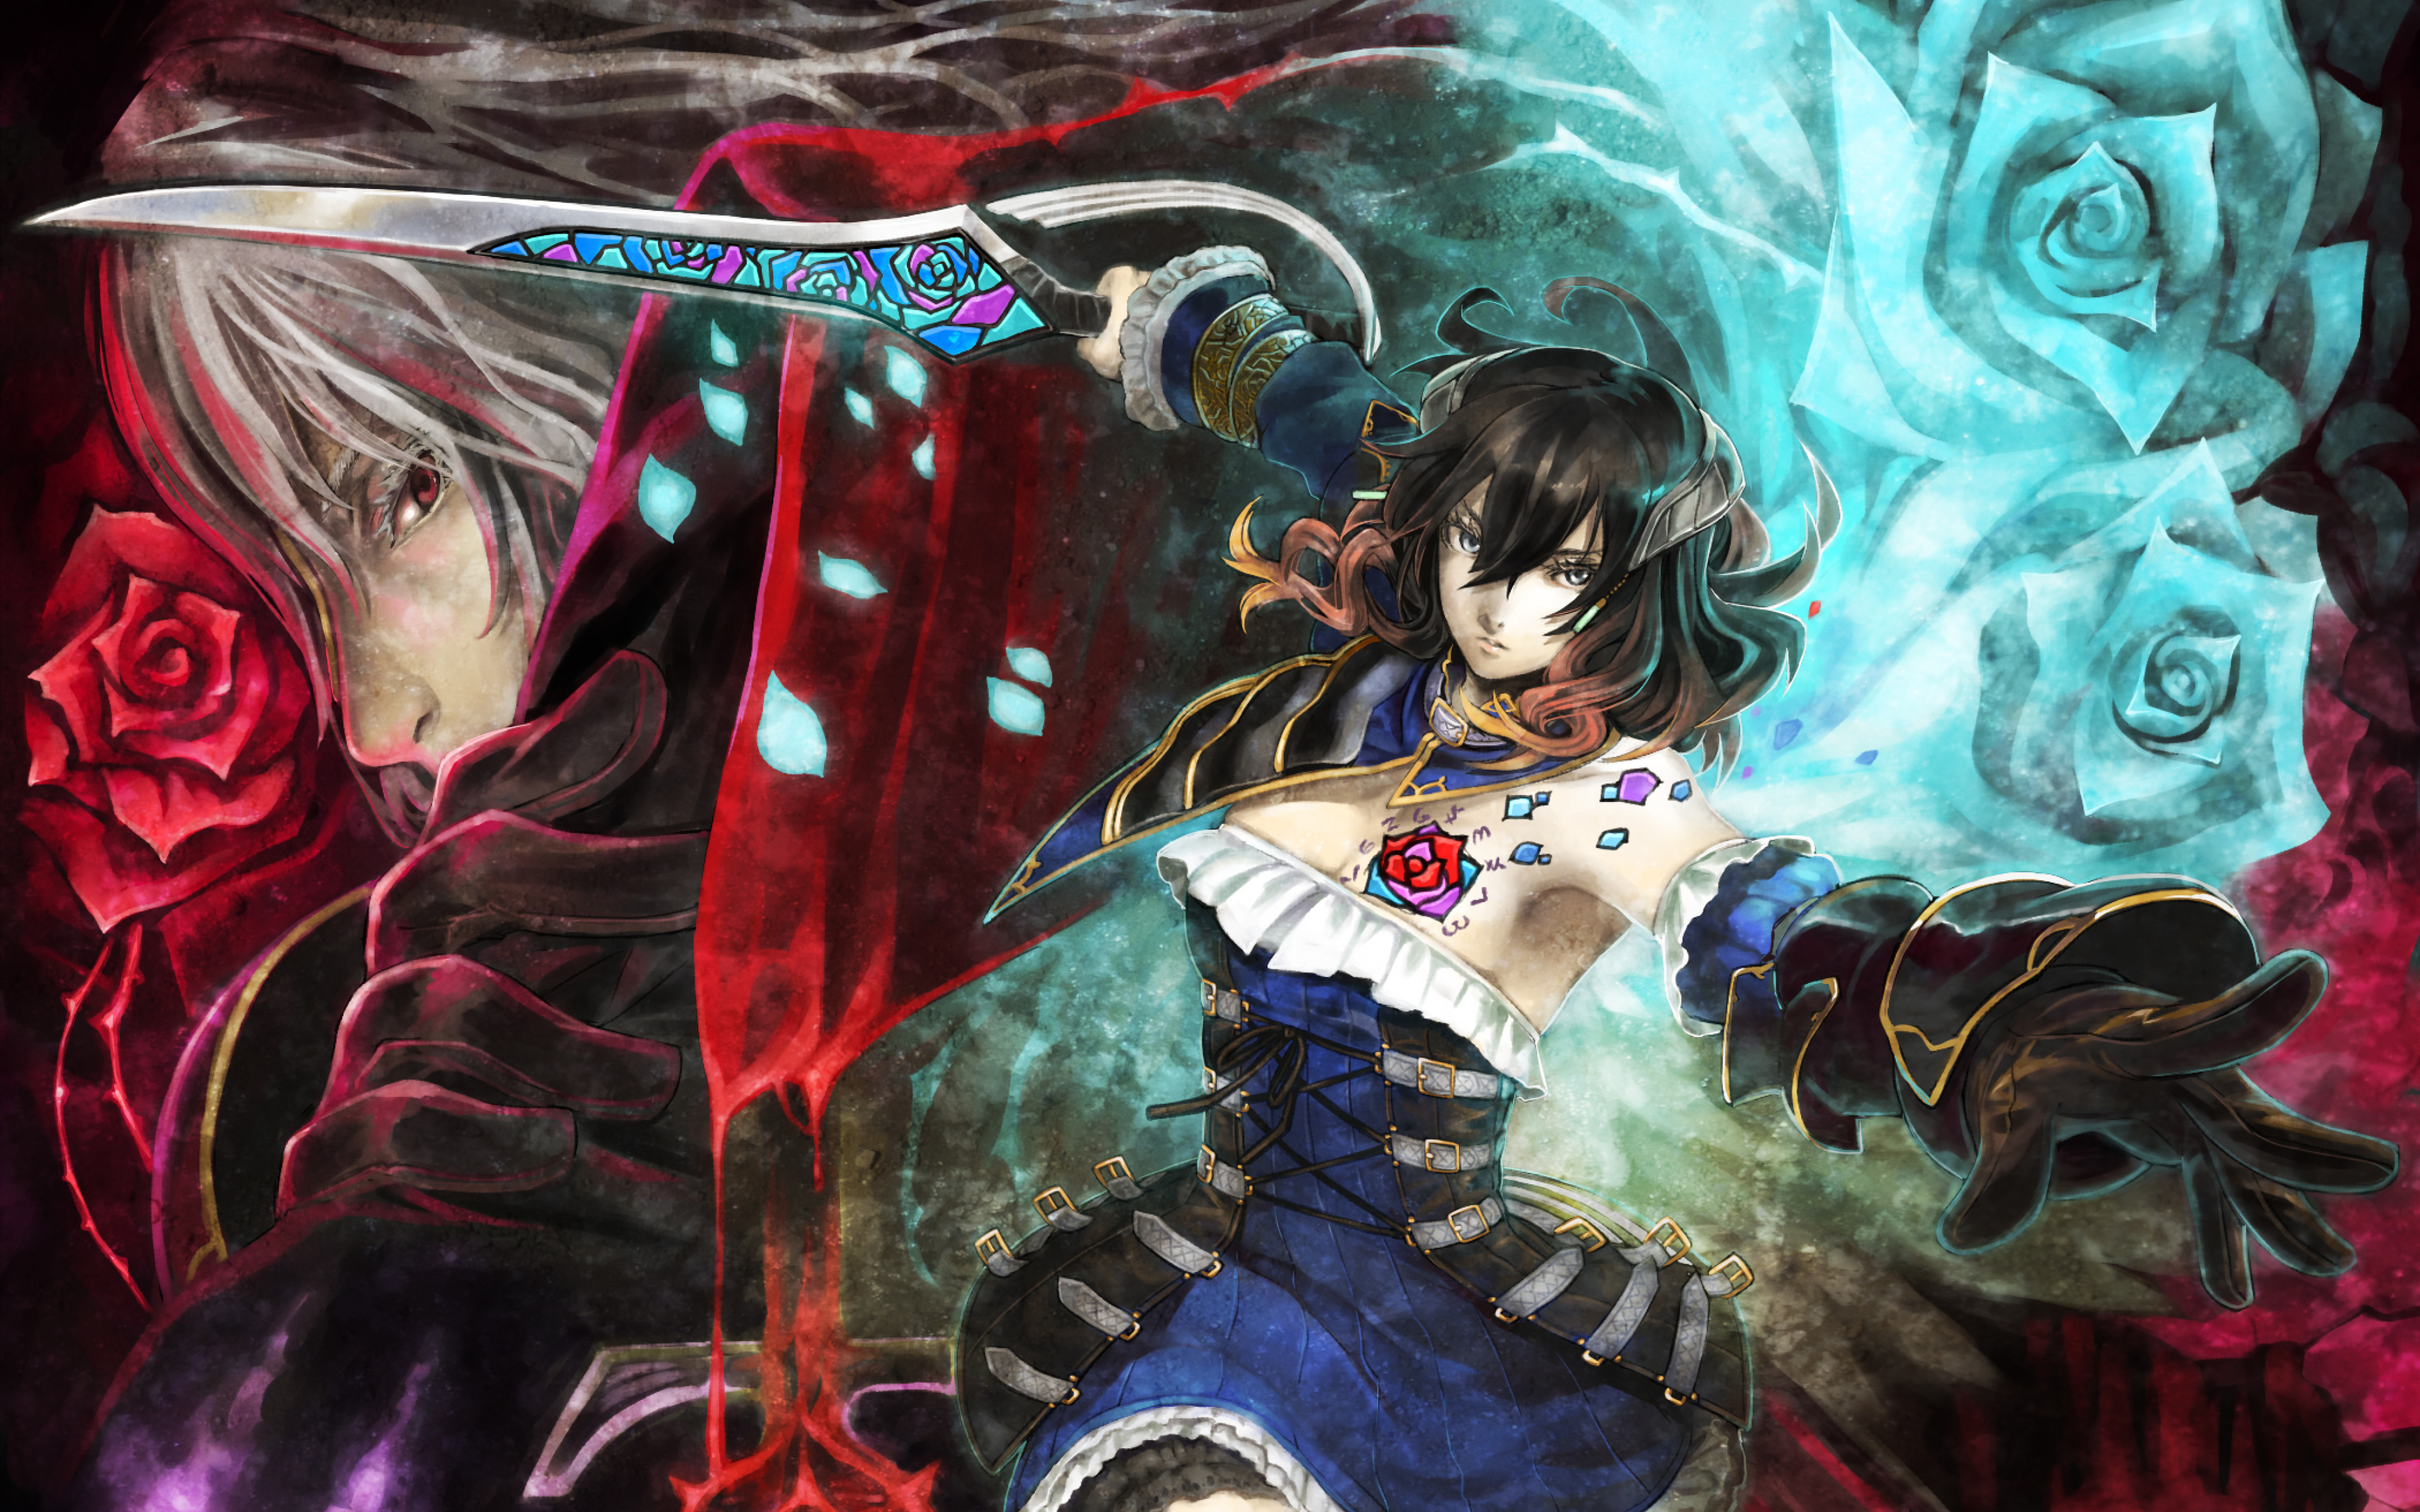 Night of revenge game. Мириам Bloodstained. Bloodstained Ritual of the Night Селеста. Bloodstained Nintendo Switch. Bloodstained Castlevania.